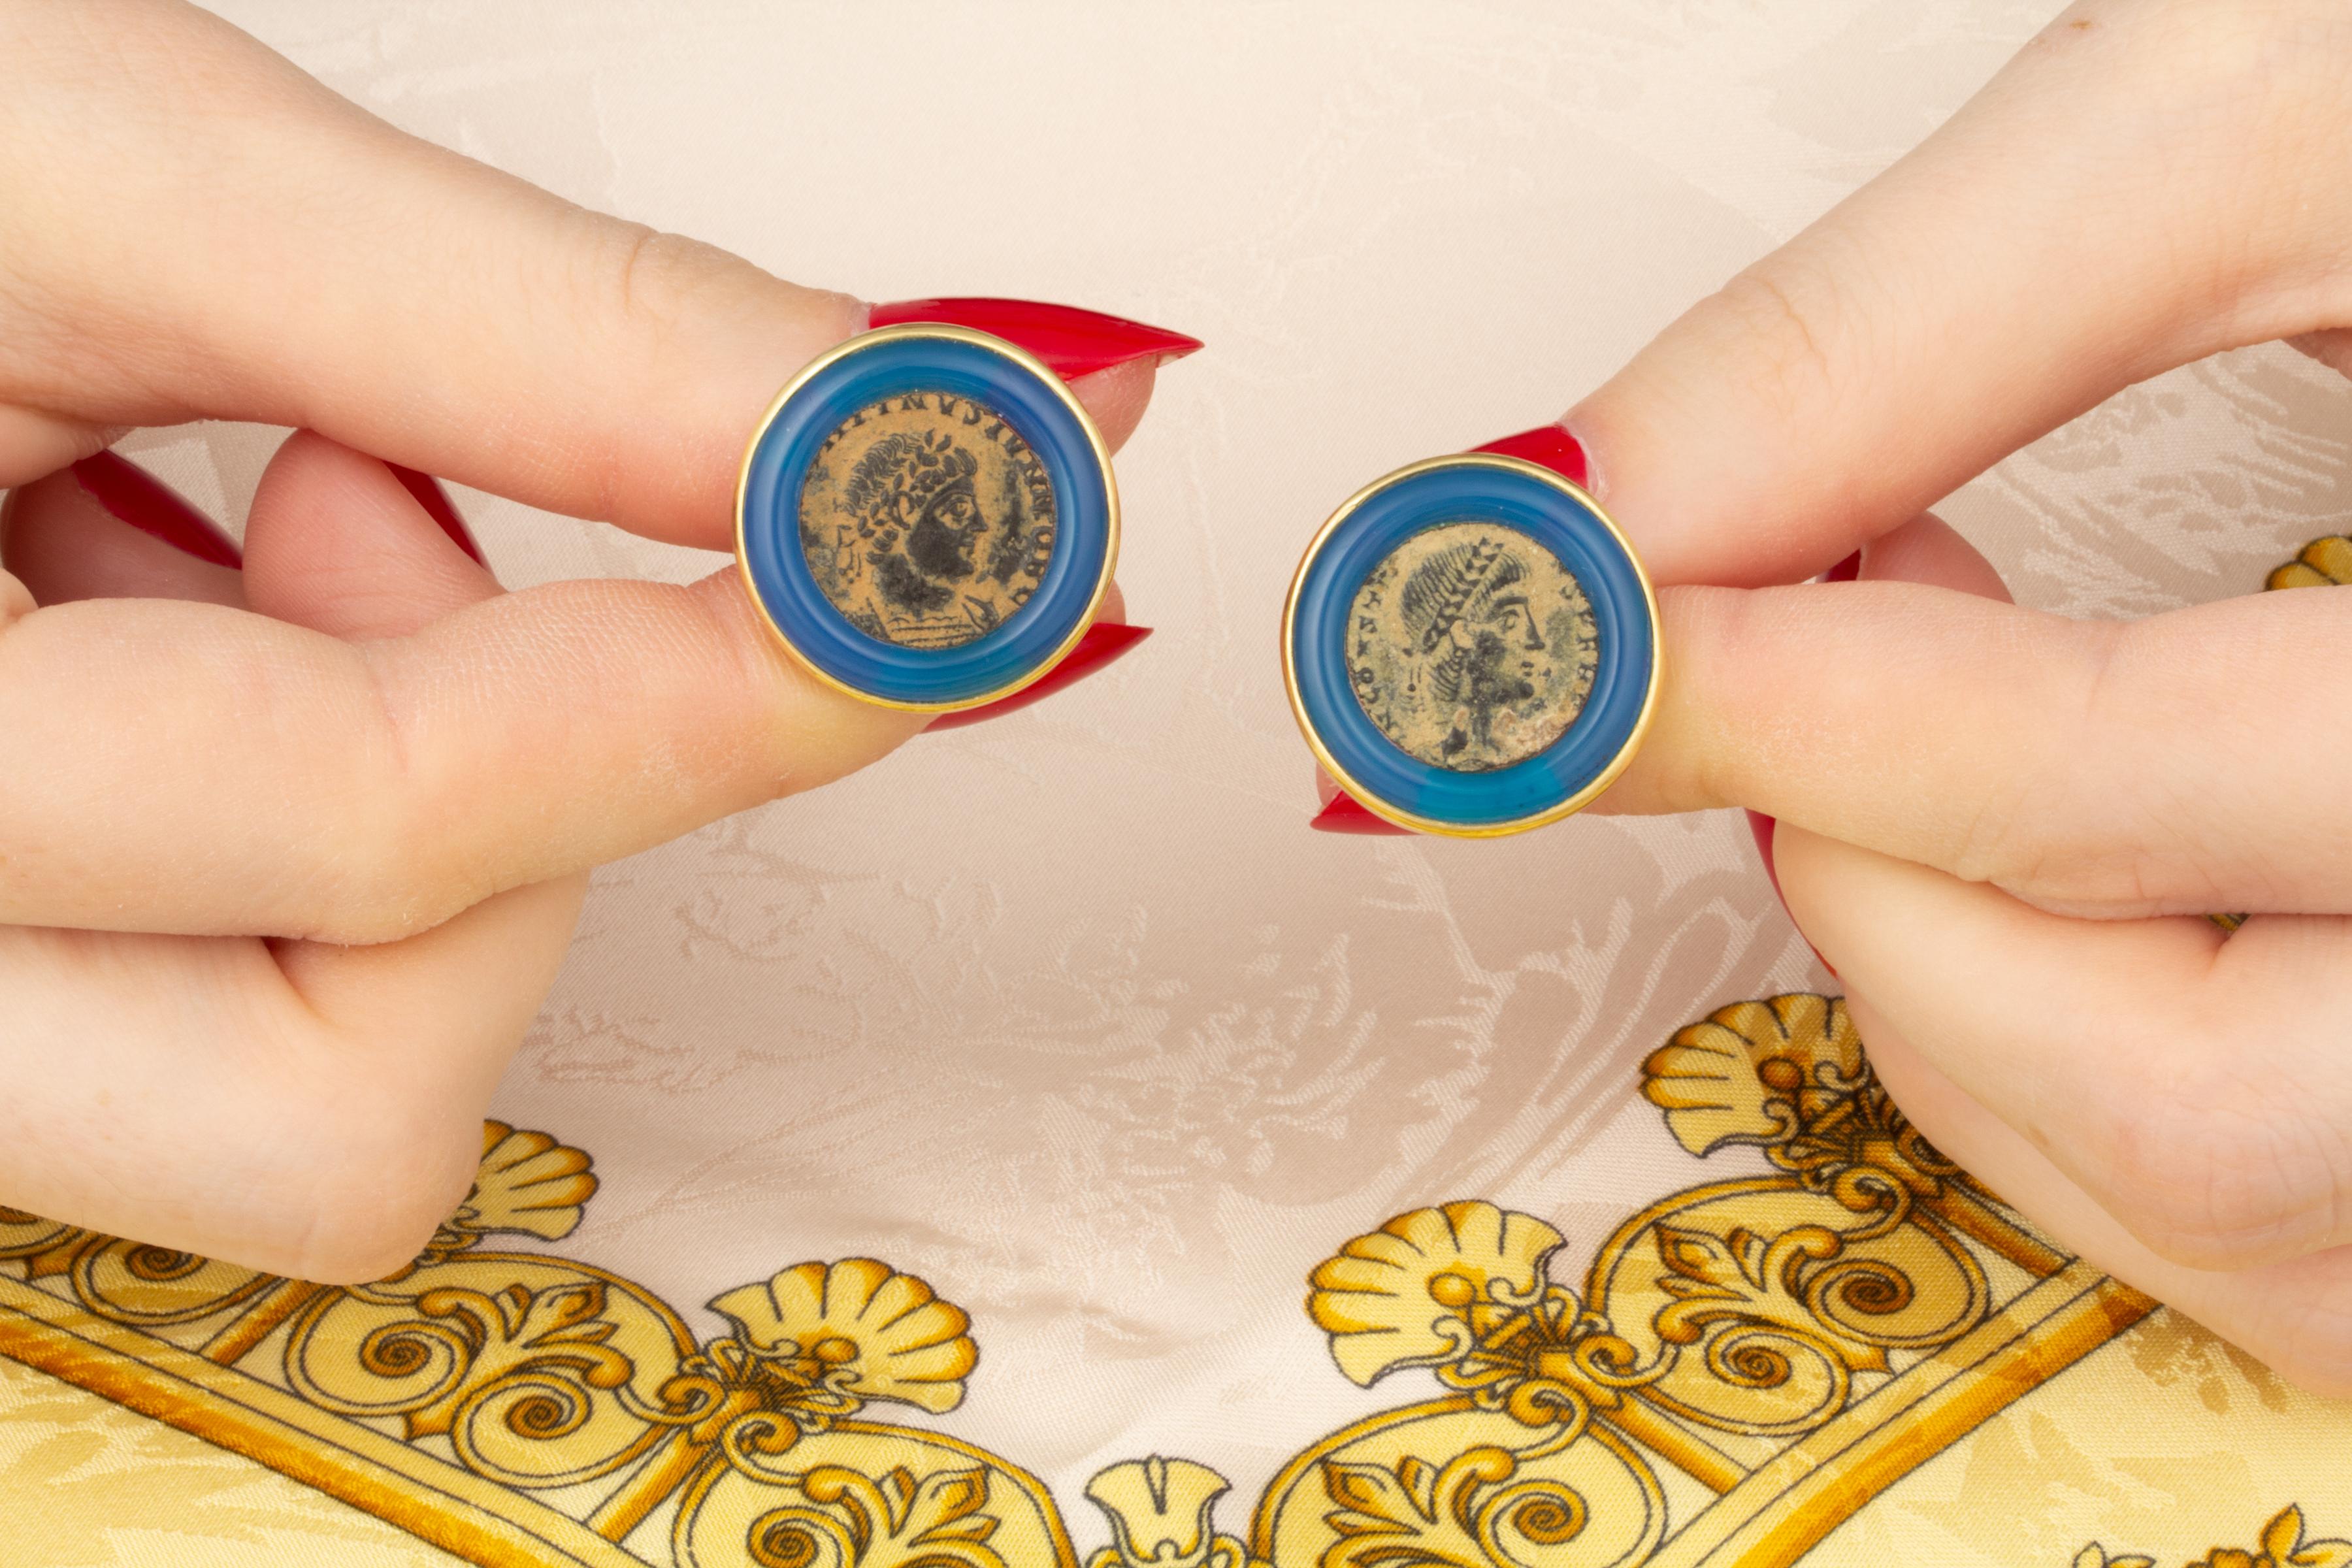 The antique copper coin cufflinks are set in blue jadeite. 
The pair is hand made in our own workshop in Naples, Italy, by maestro Giuseppe, according to an original design by Ella Gafter.
The cufflinks are signed EG.
